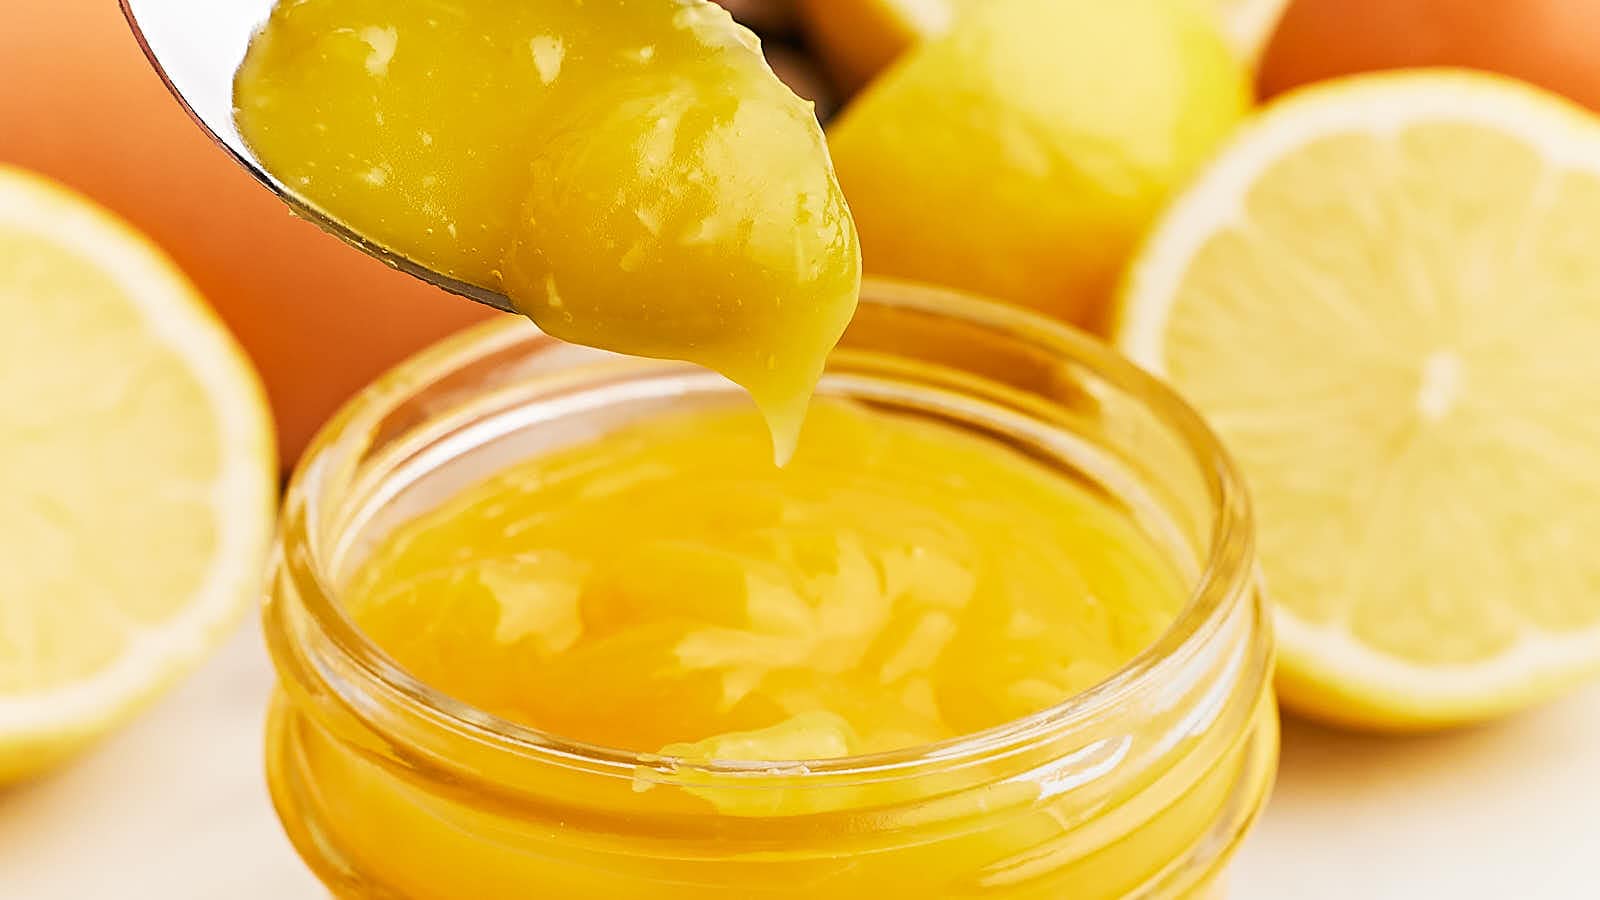 Lemon Curd recipe by Cheerful Cook.